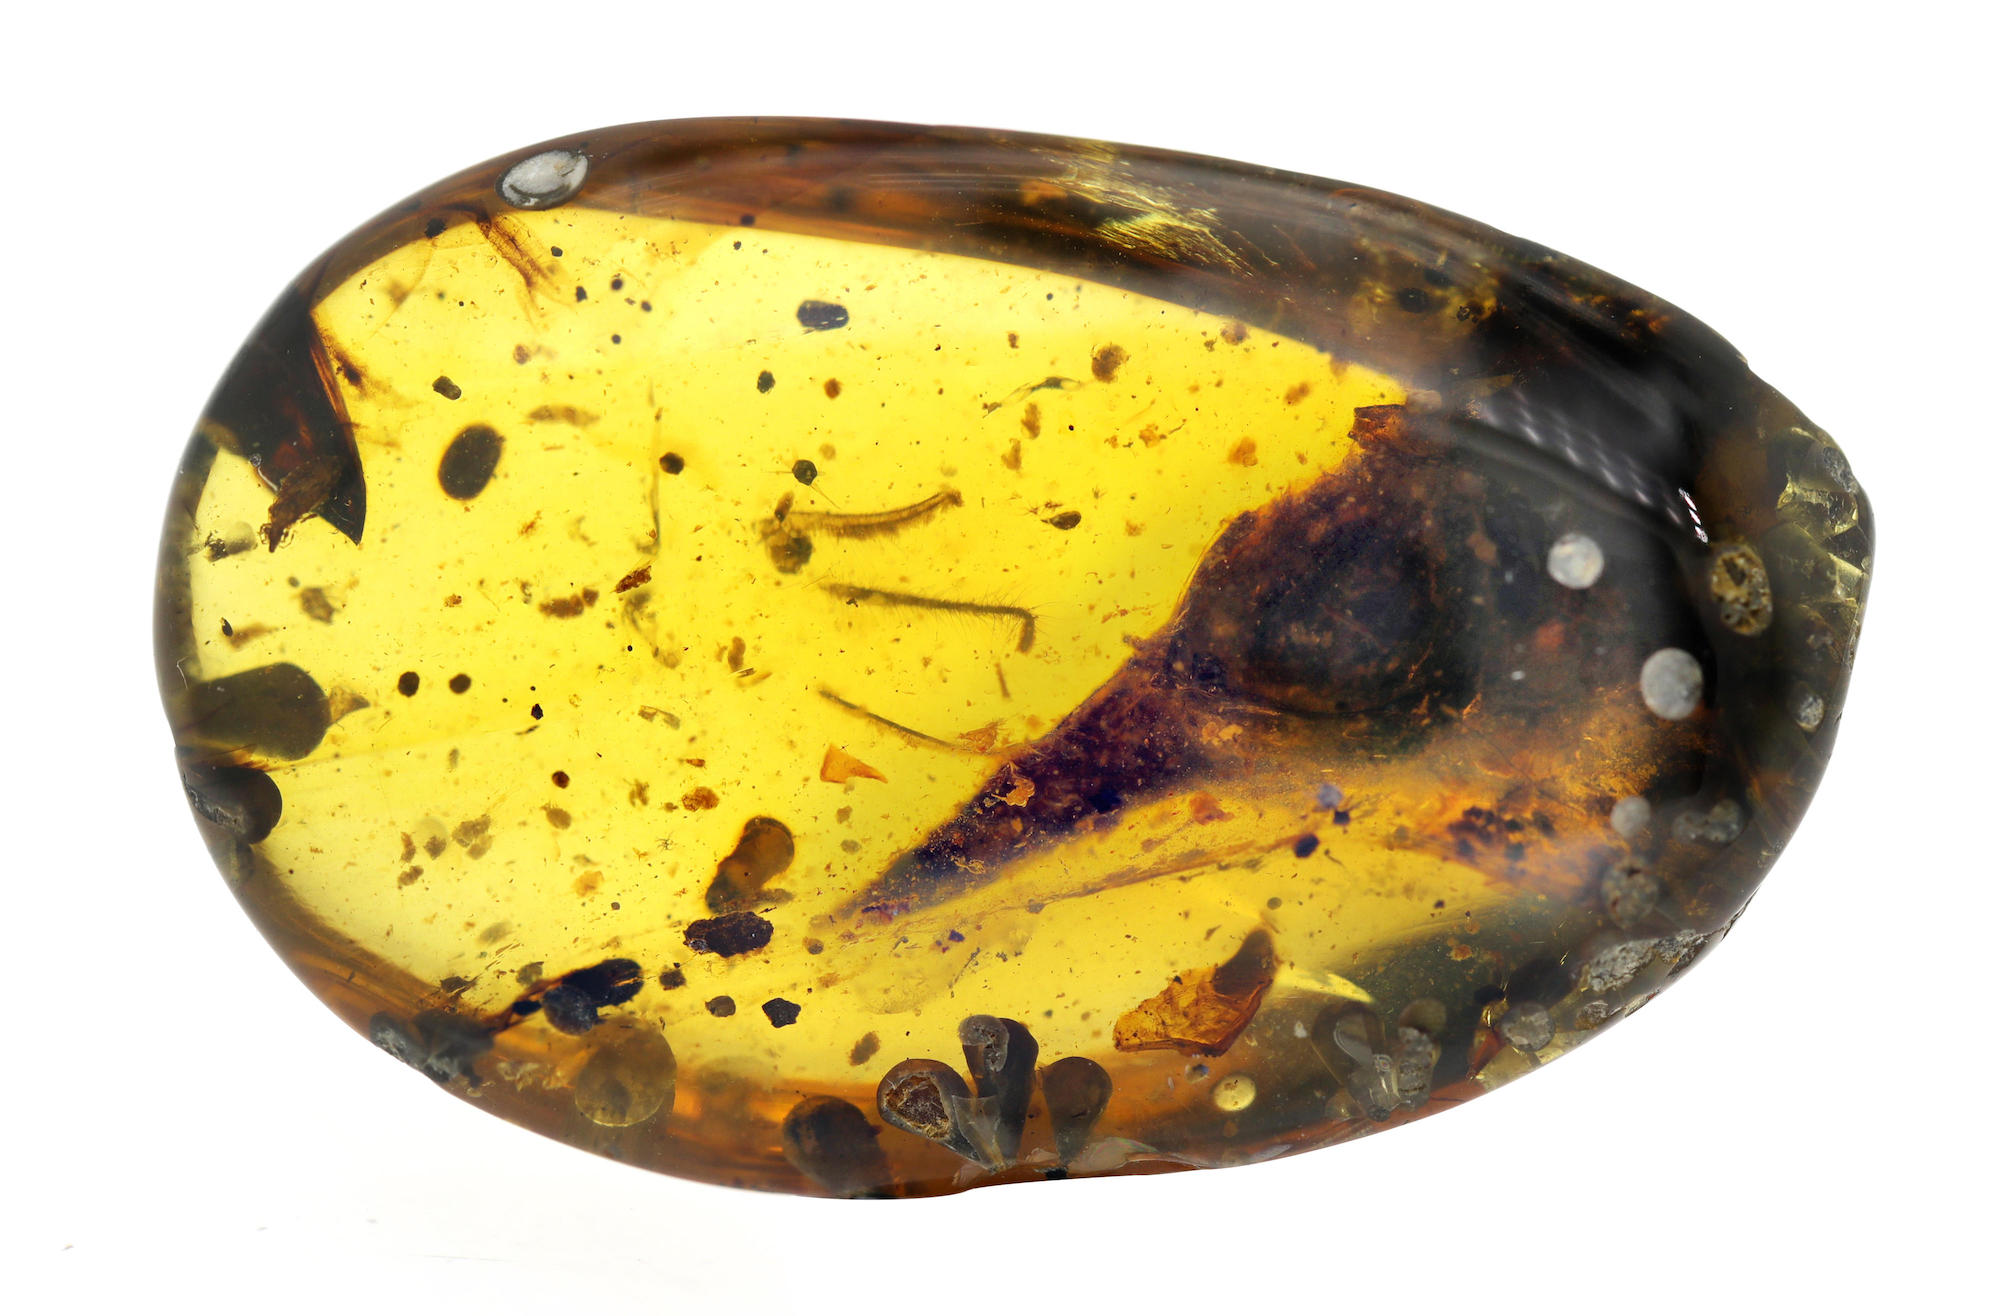 Trapped in amber, this could be the smallest dinosaur ever found